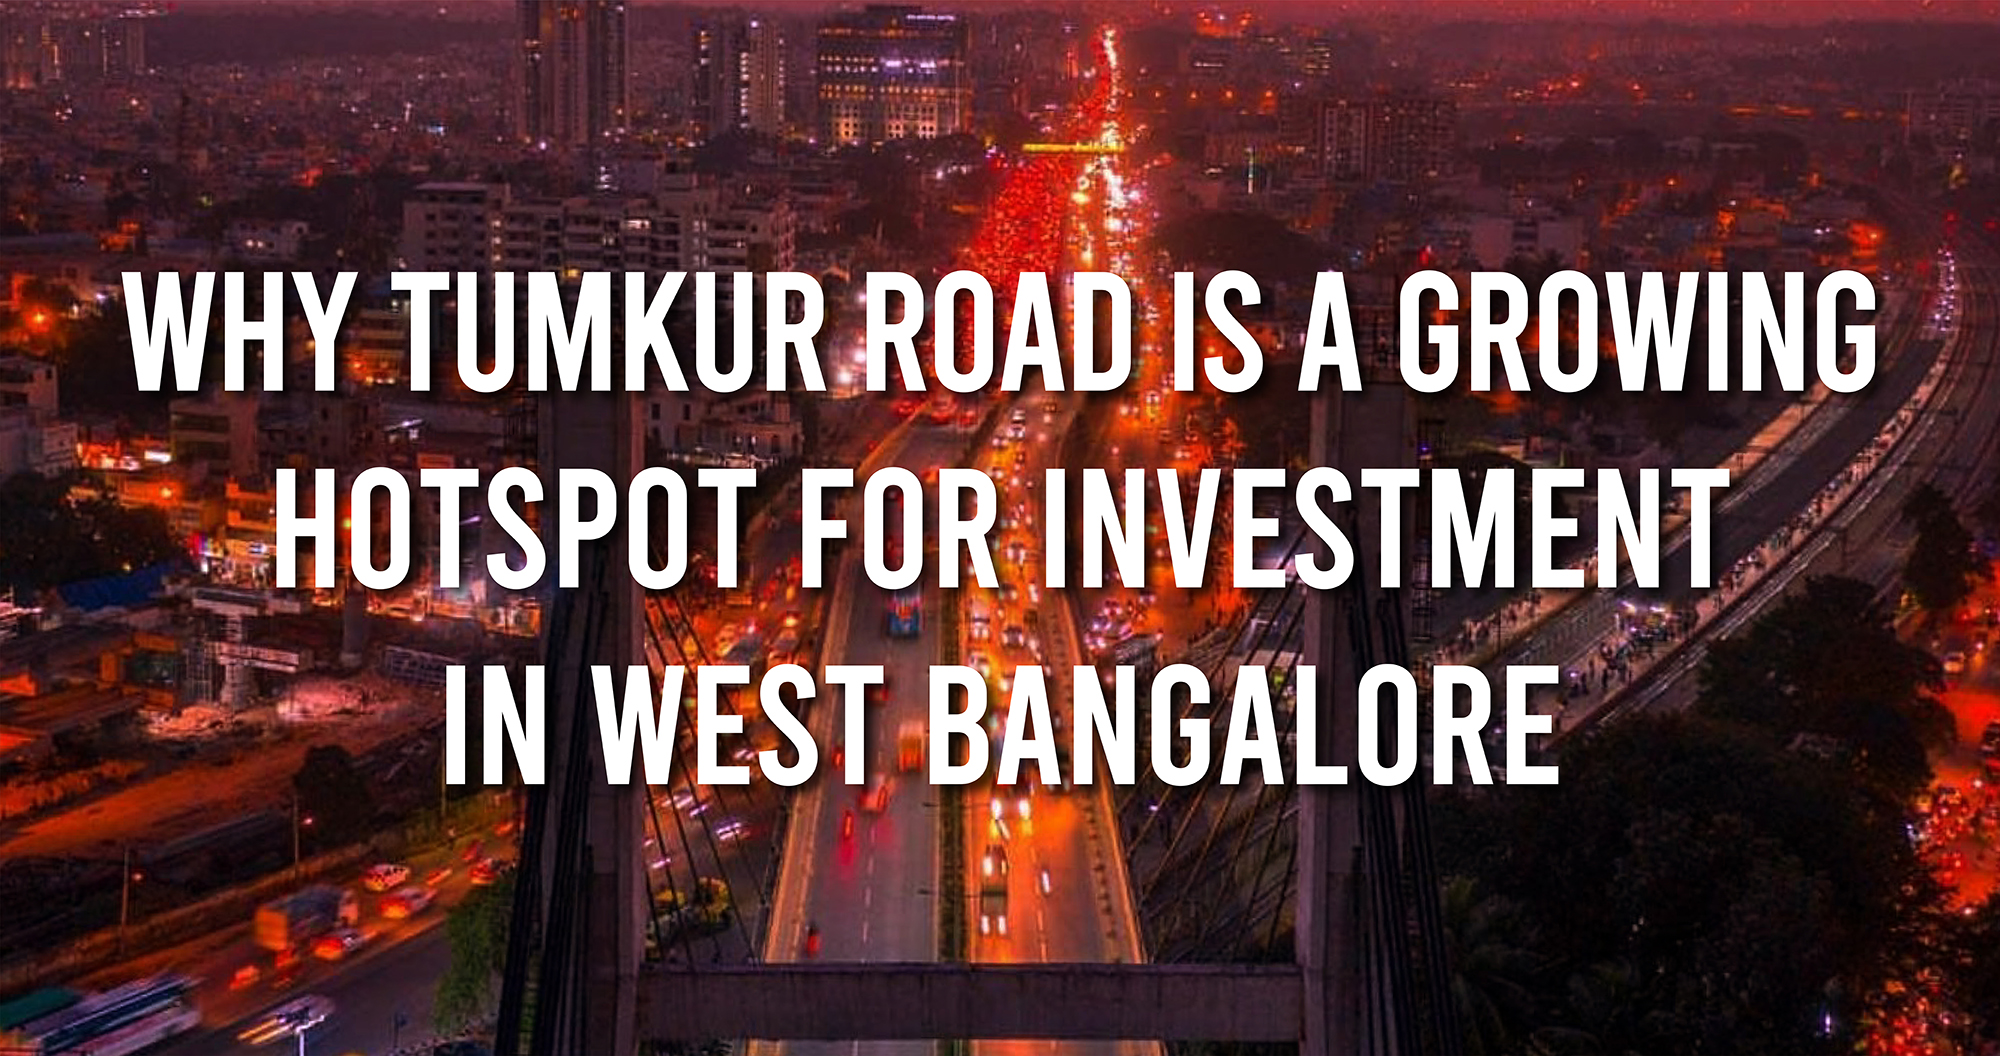 Why Tumkur Road is a Growing Hotspot for Investment in West Bangalore